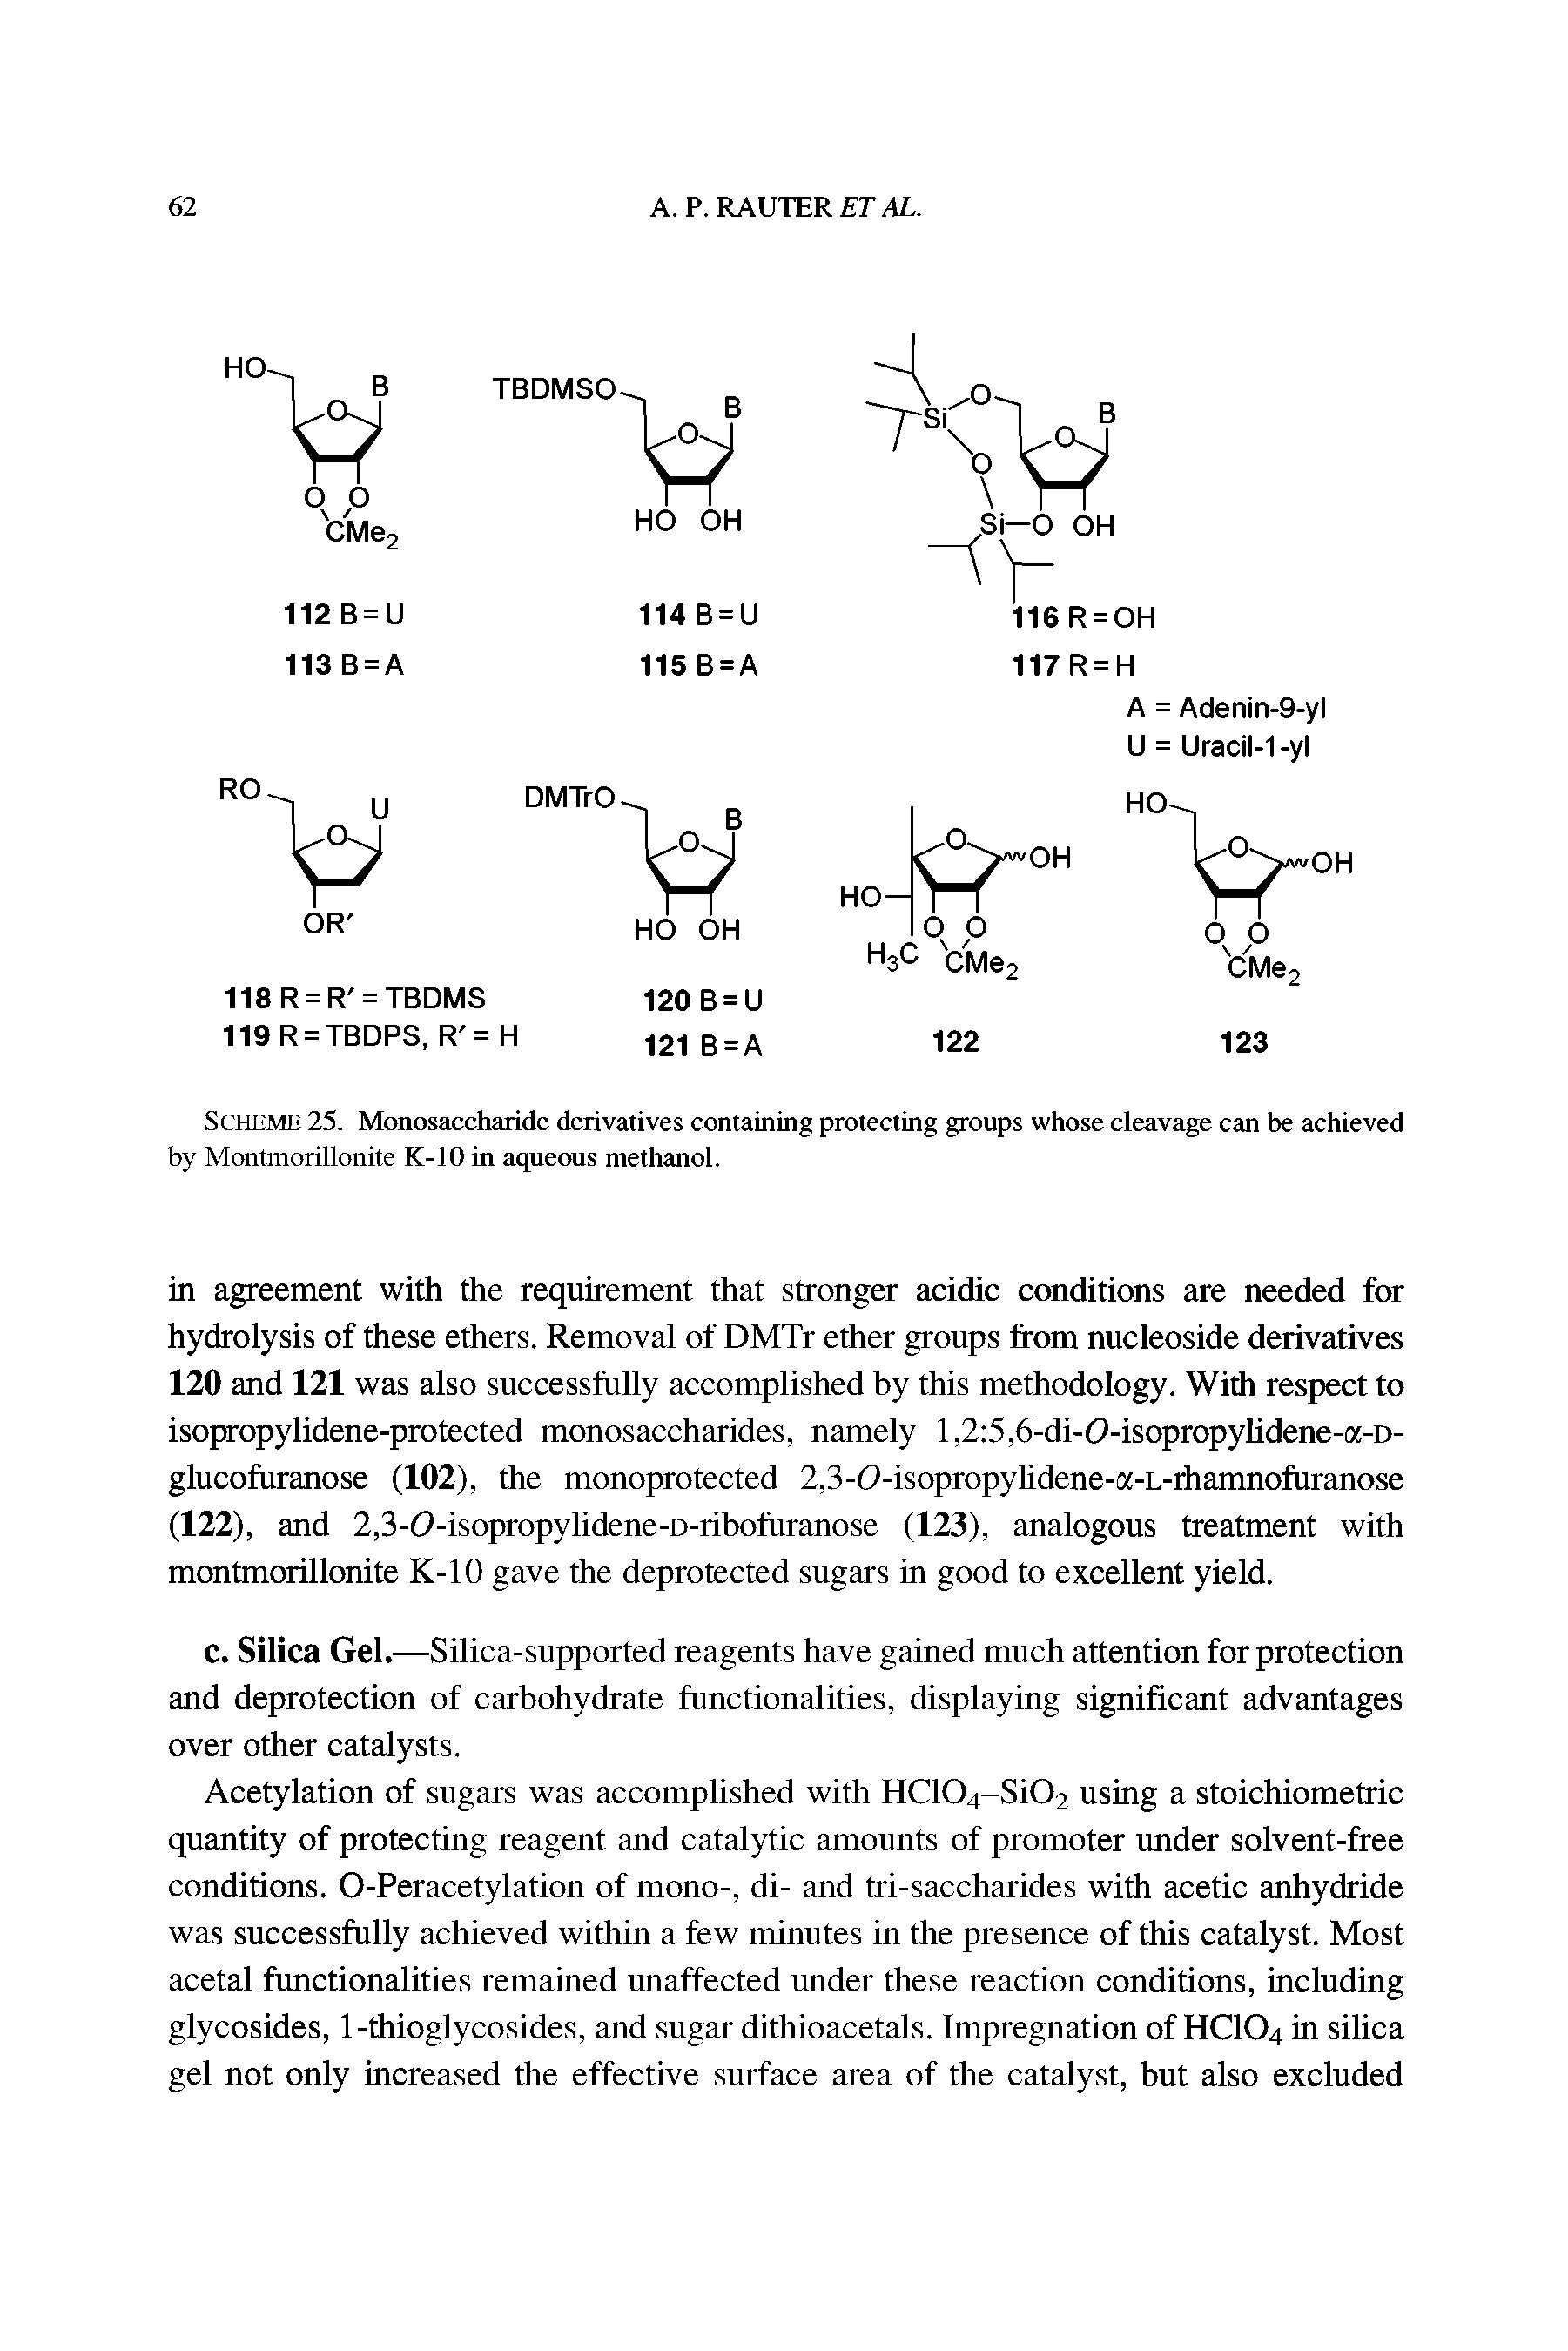 Scheme 25. Monosaccharide derivatives containing protecting groups whose cleavage can be achieved by Montmorillonite K-10 in aqueous methanol.